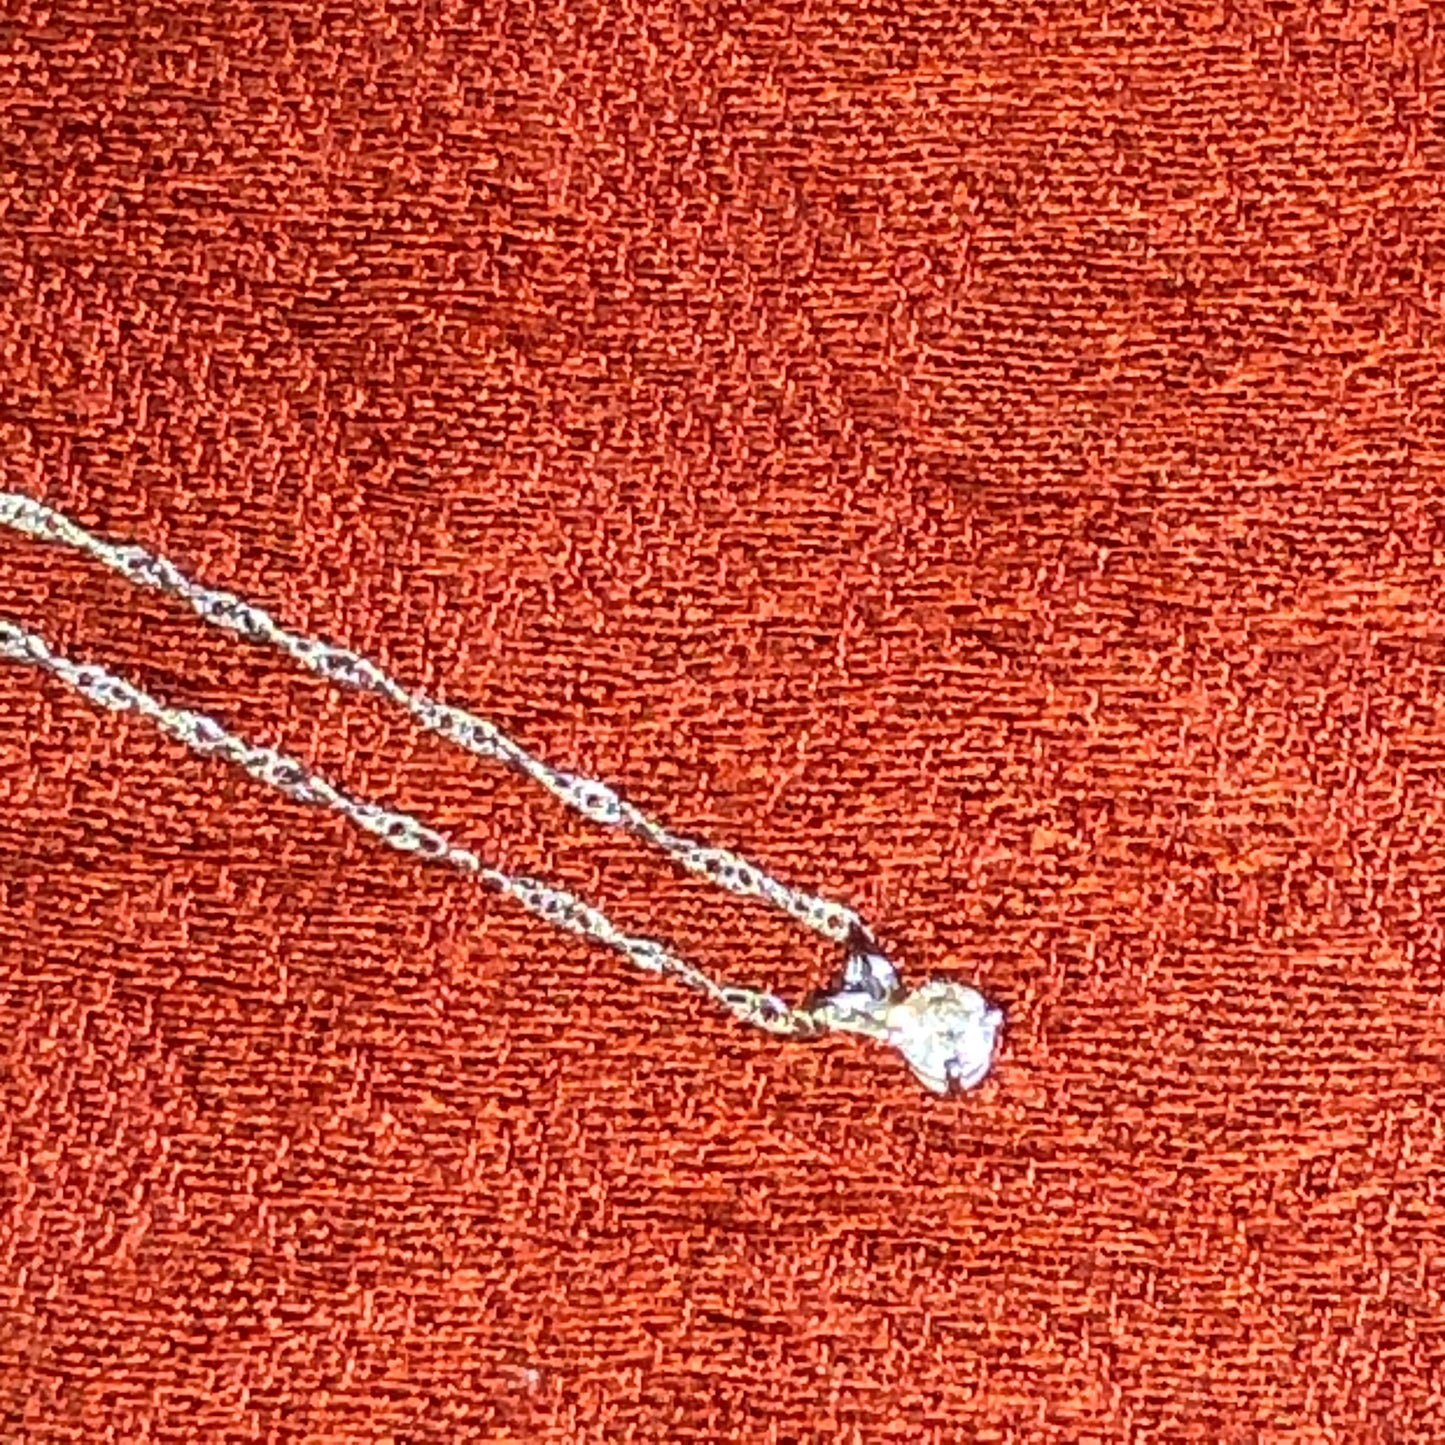 14K White Gold Diamond Necklace-16 inches